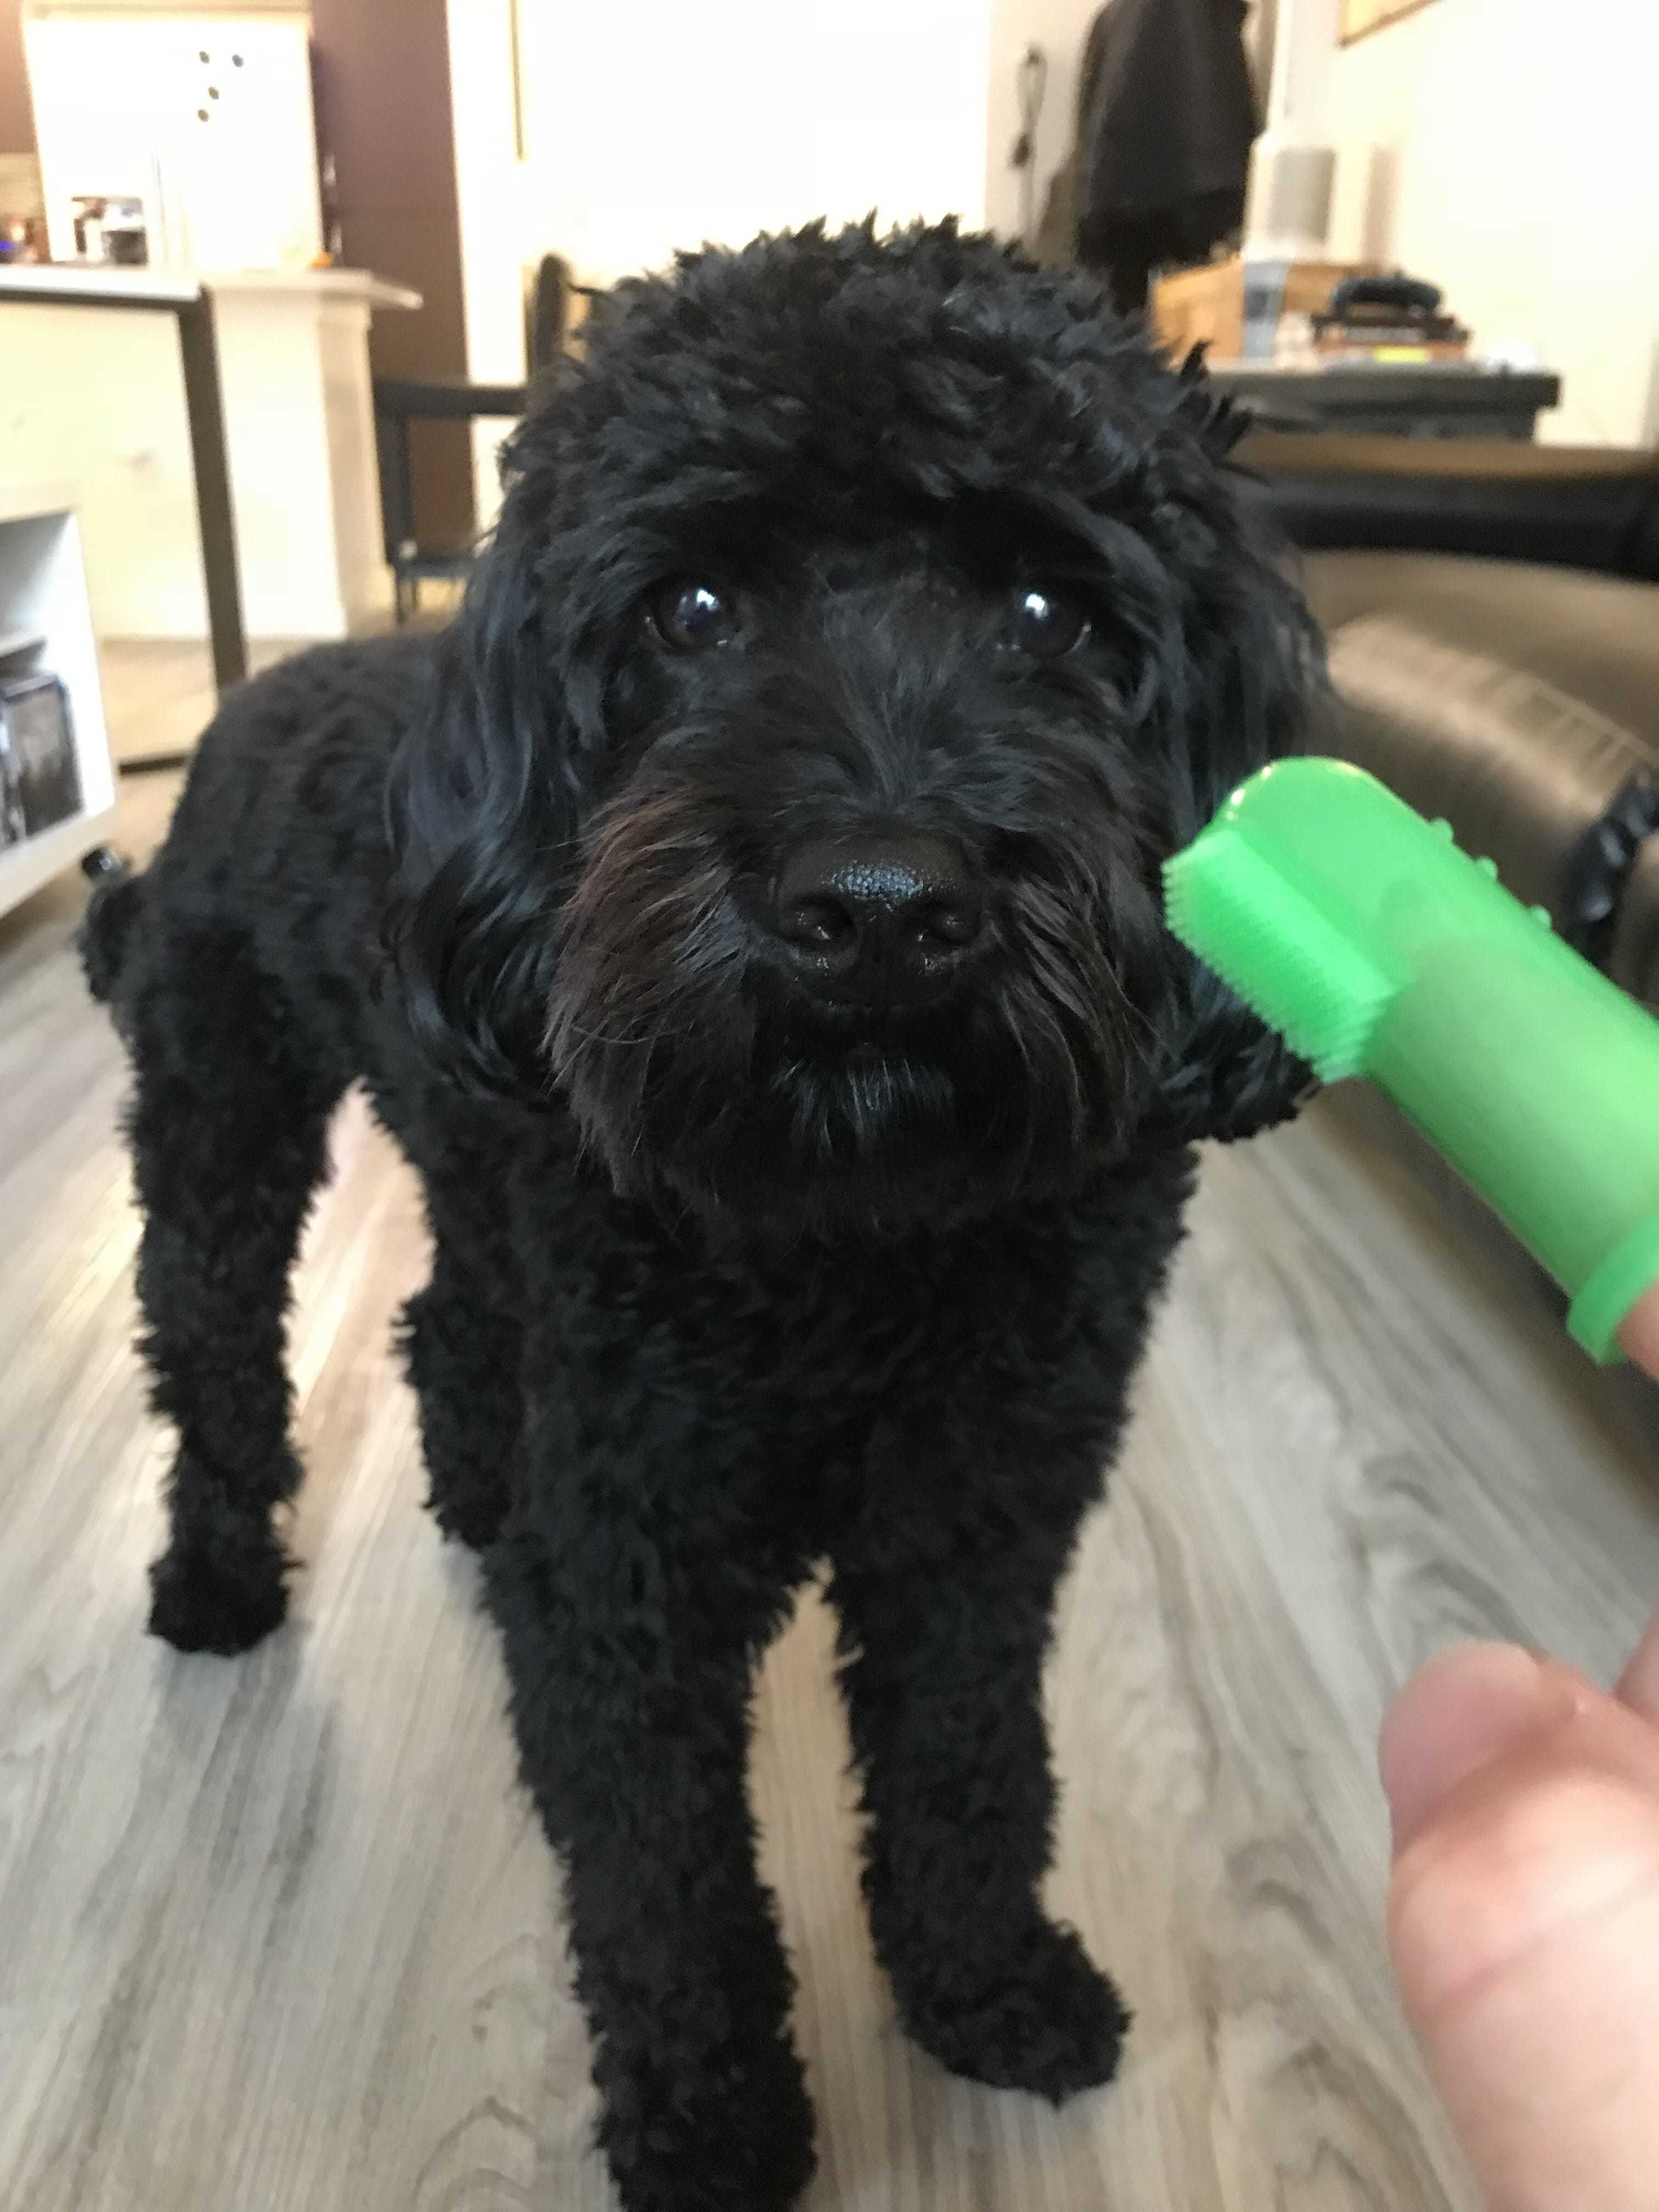 the best way to keep your dog's teeth clean is daily brushing